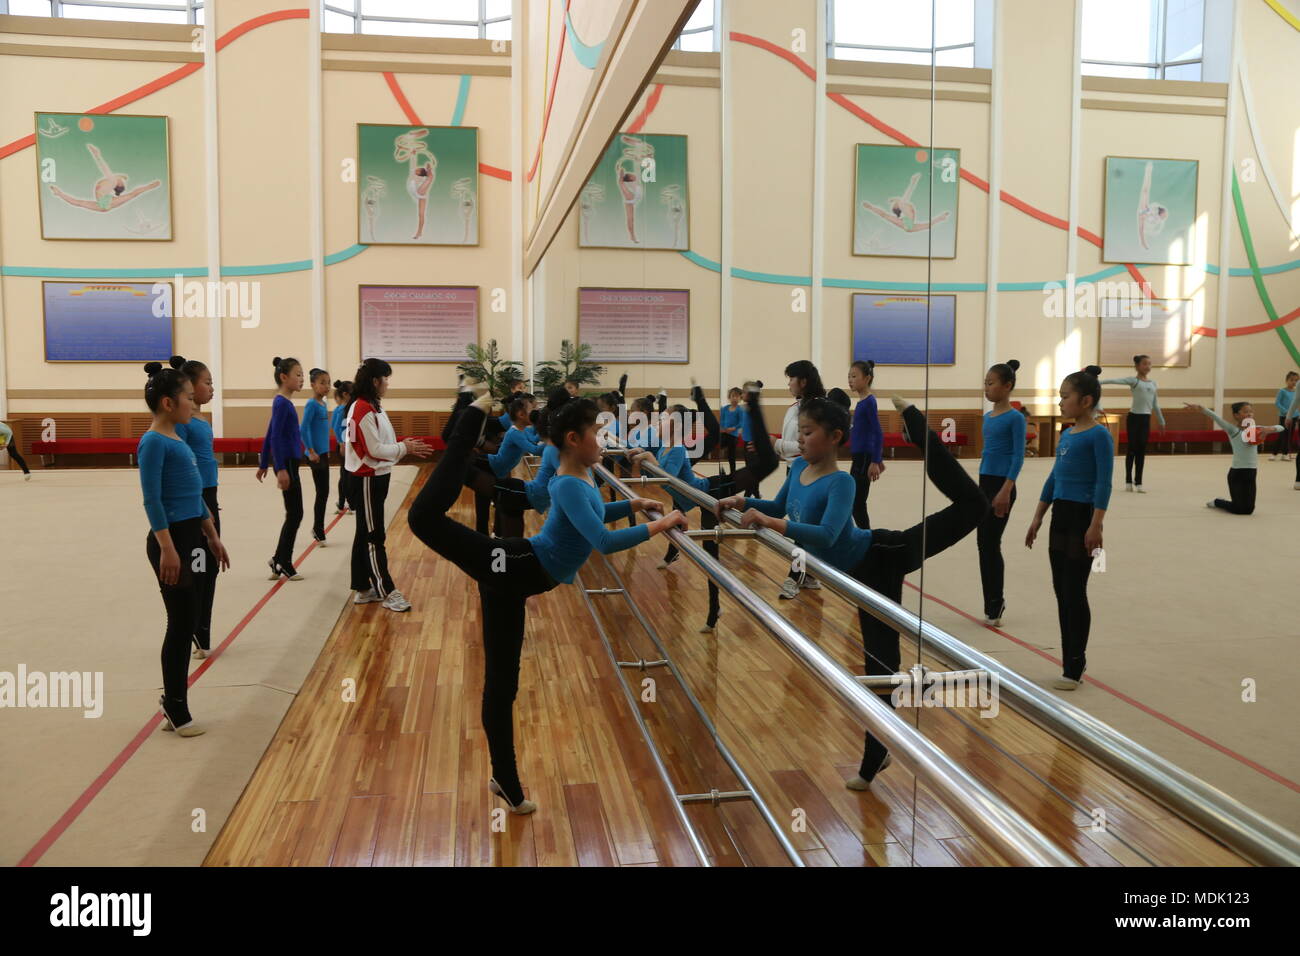 Pyongyang, Democratic People's Republic of Korea (DPRK). 19th Apr, 2018. Students of the rhythmic gymnastics group exercise at the Mangyongdae Schoolchildren's Palace on the western outskirts of Pyongyang, capital of the Democratic People's Republic of Korea (DPRK), on April 19, 2018. Credit: Cheng Dayu/Xinhua/Alamy Live News Stock Photo